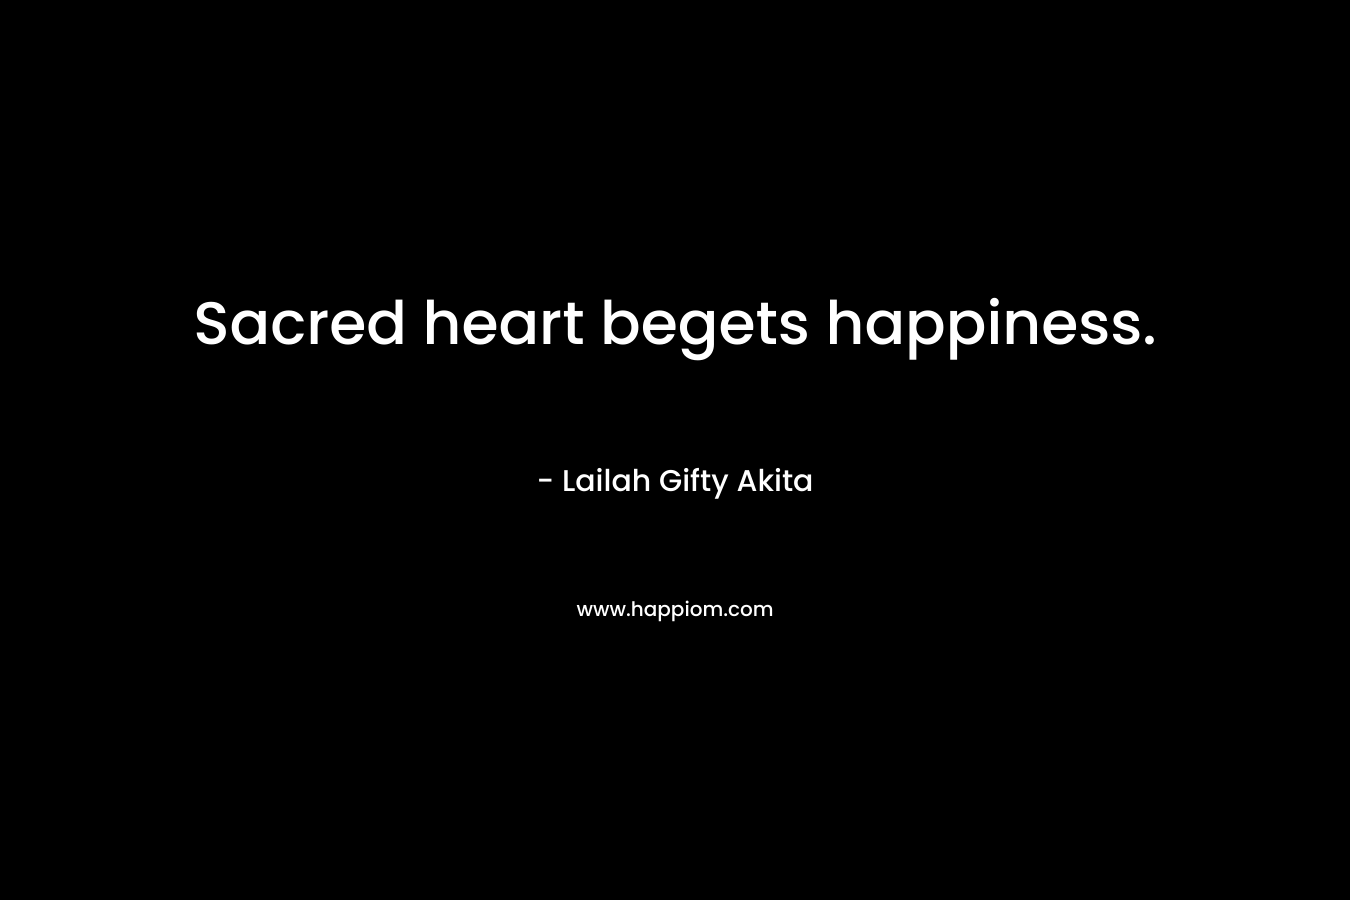 Sacred heart begets happiness.